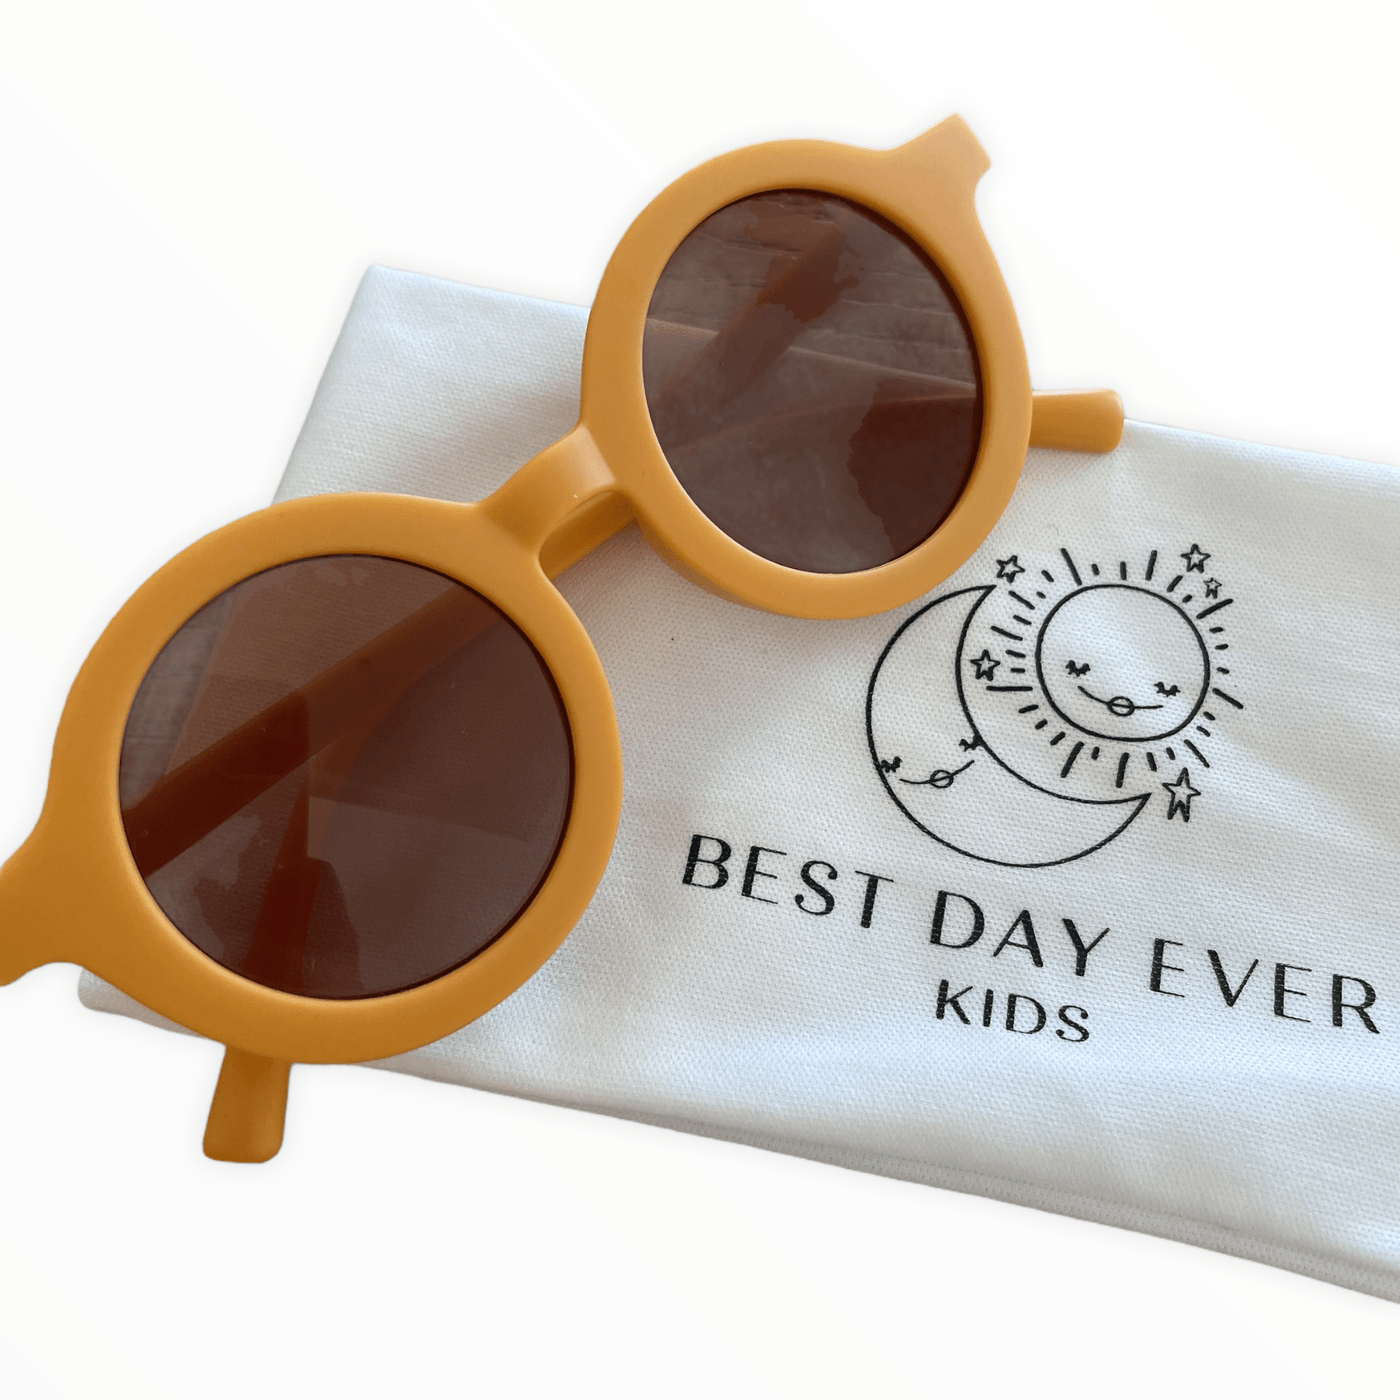 Best Day Ever Kids Sunglasses Signature Sunny - Sage buy online boutique kids clothing